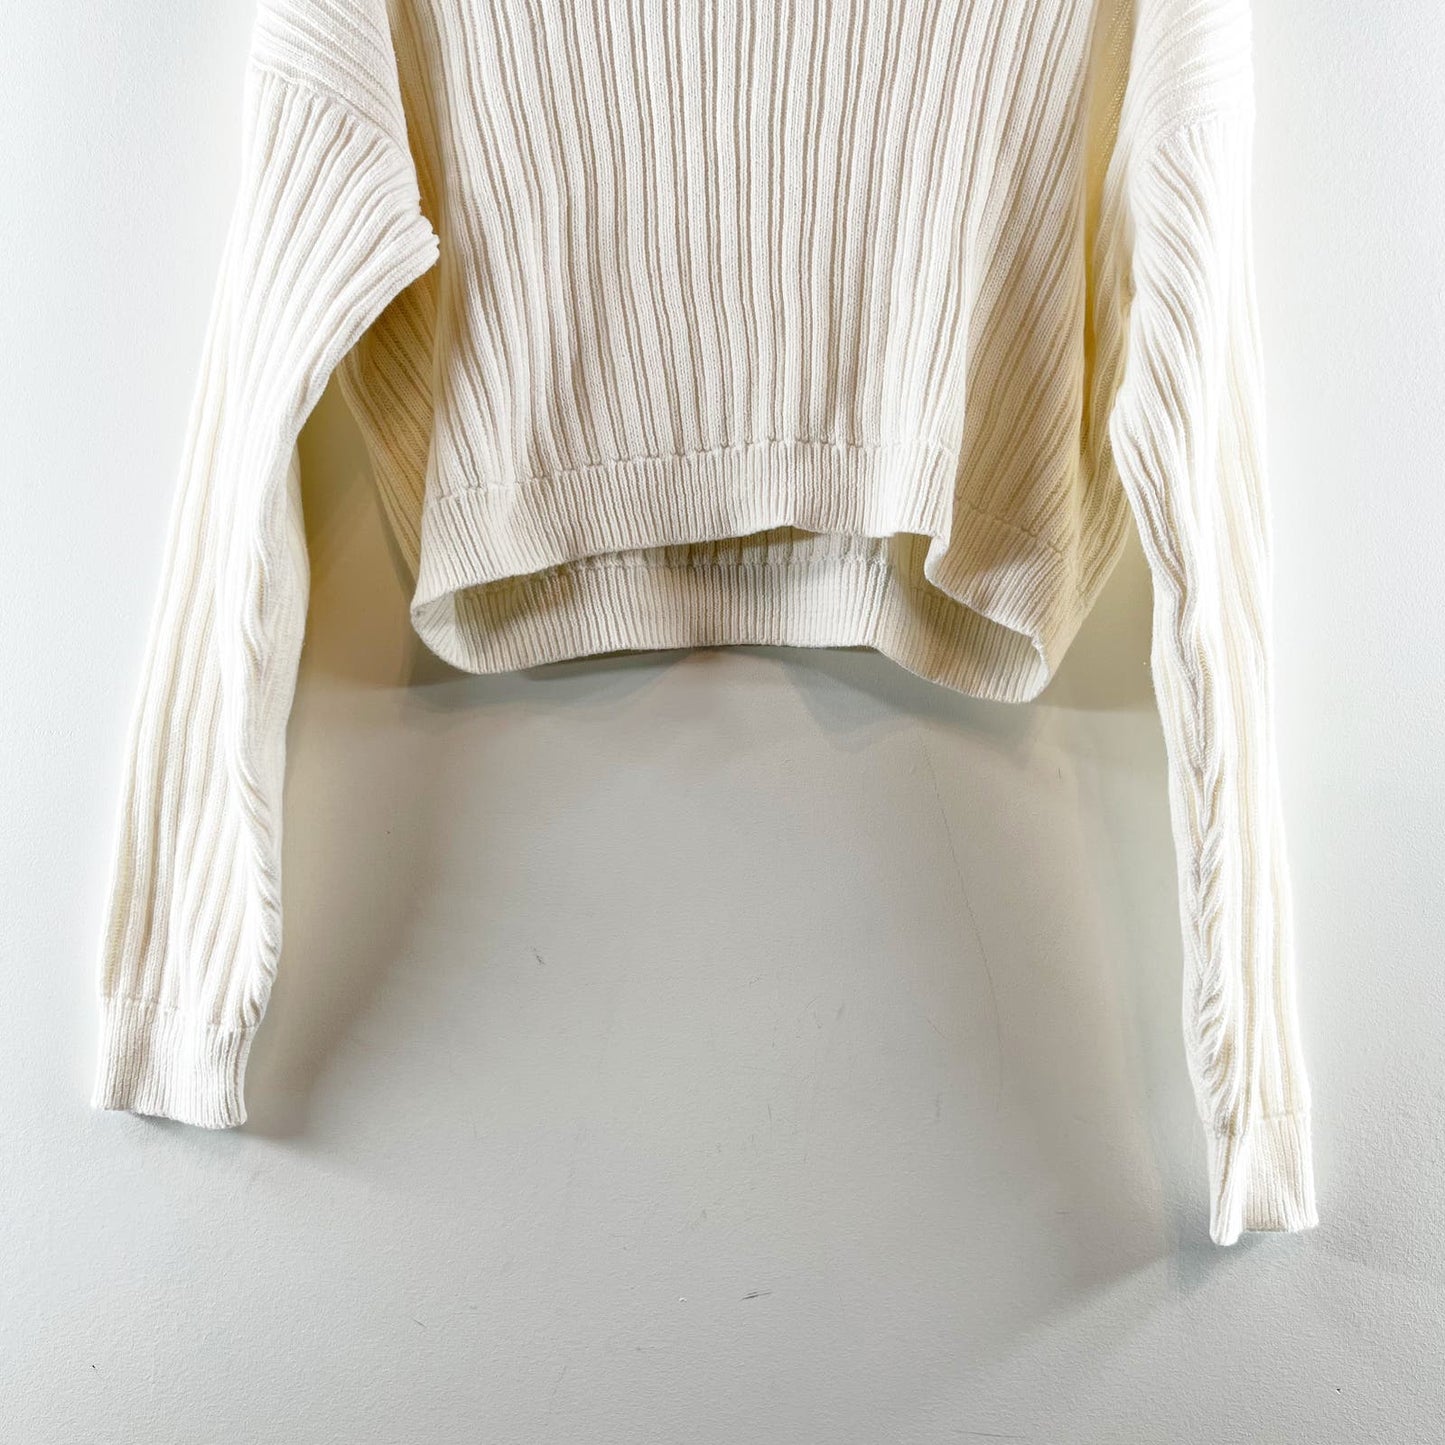 Hollister Ribbed Cropped Long Sleeve Crewneck Sweater White XS